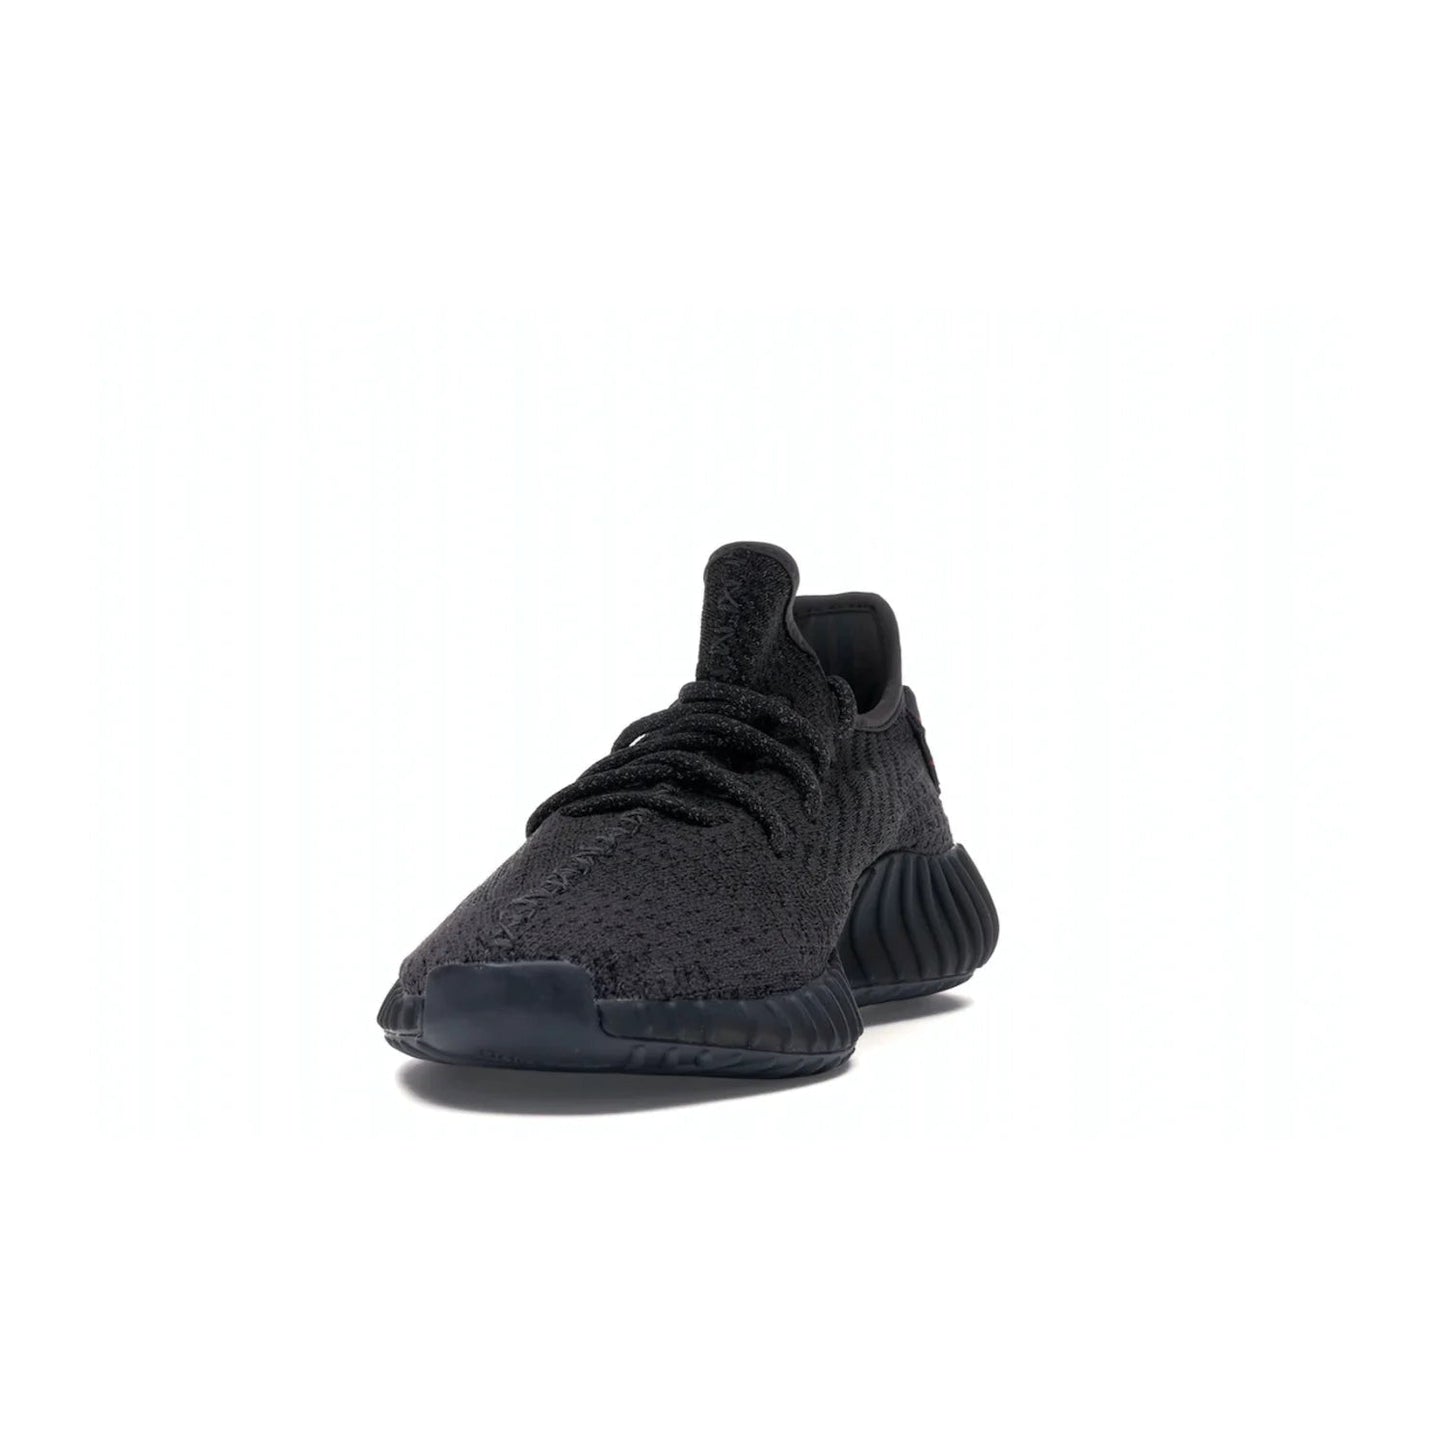 adidas Yeezy Boost 350 V2 Static Black (Reflective) - Image 12 - Only at www.BallersClubKickz.com - Make a statement with the adidas Yeezy Boost 350 V2 Static Black Reflective. All-black upper, reflective accents, midsole, and sole combine for a stylish look. High quality materials. June 2019 release. Add to your collection today.